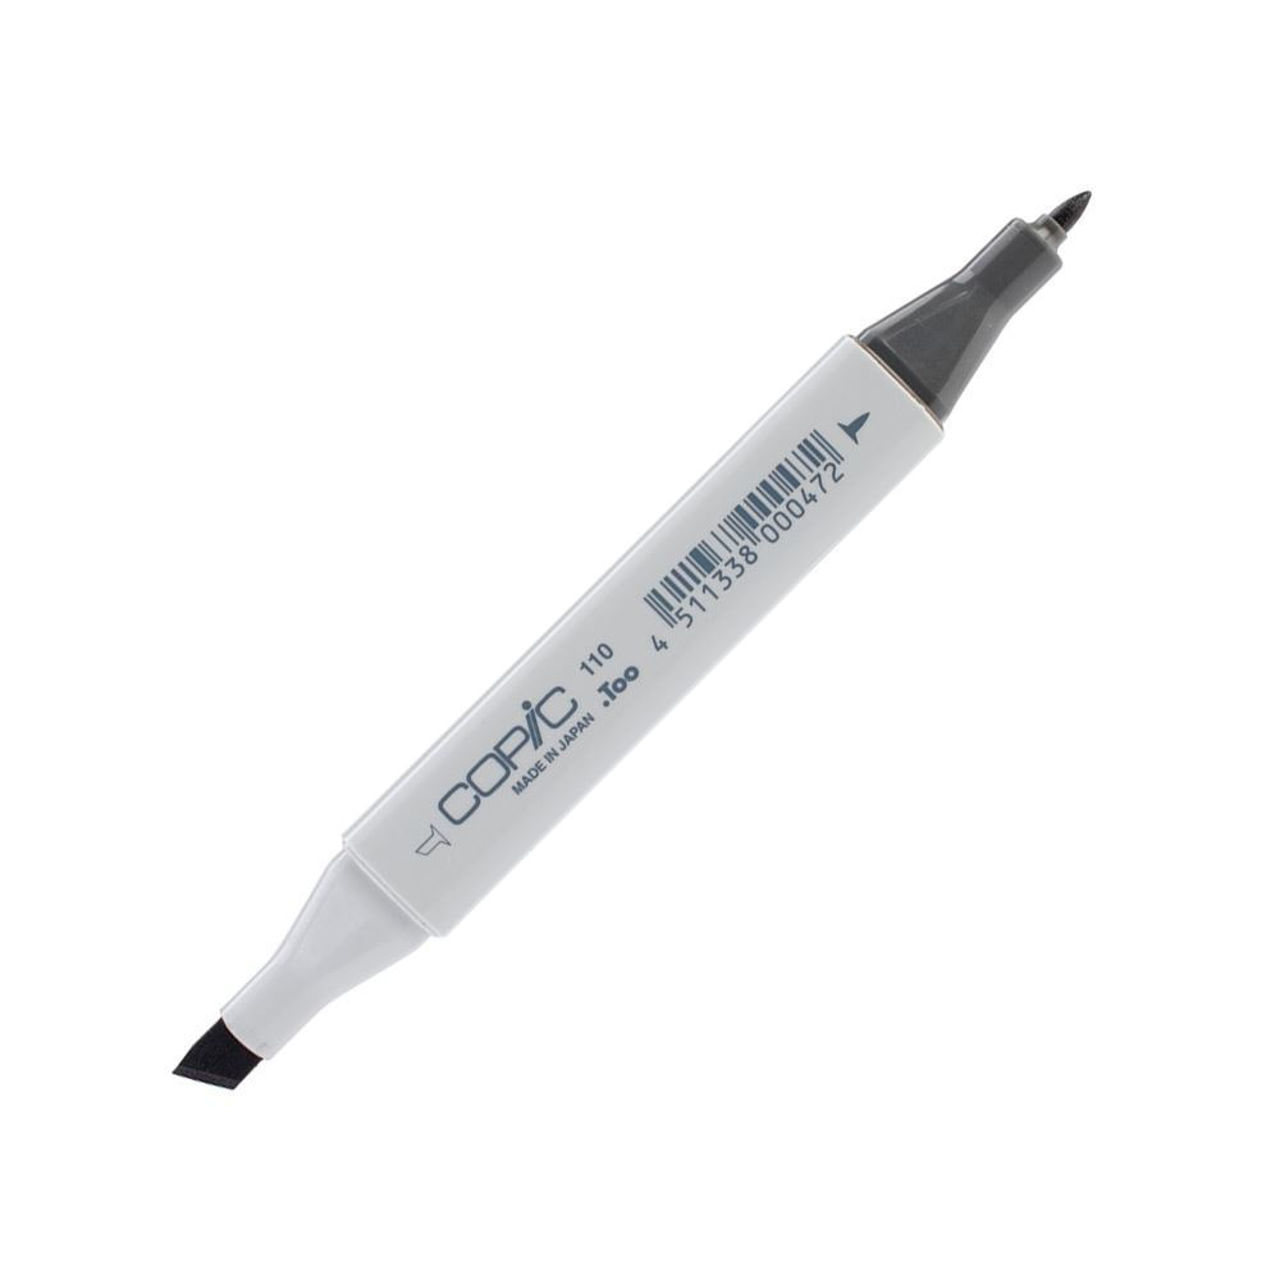 Copic Markers come in 4 different types Copic Ciao Copic Sketch Copic  Wide and Copic Classic  Sarah Renae Clark  Coloring Book Artist and  Designer